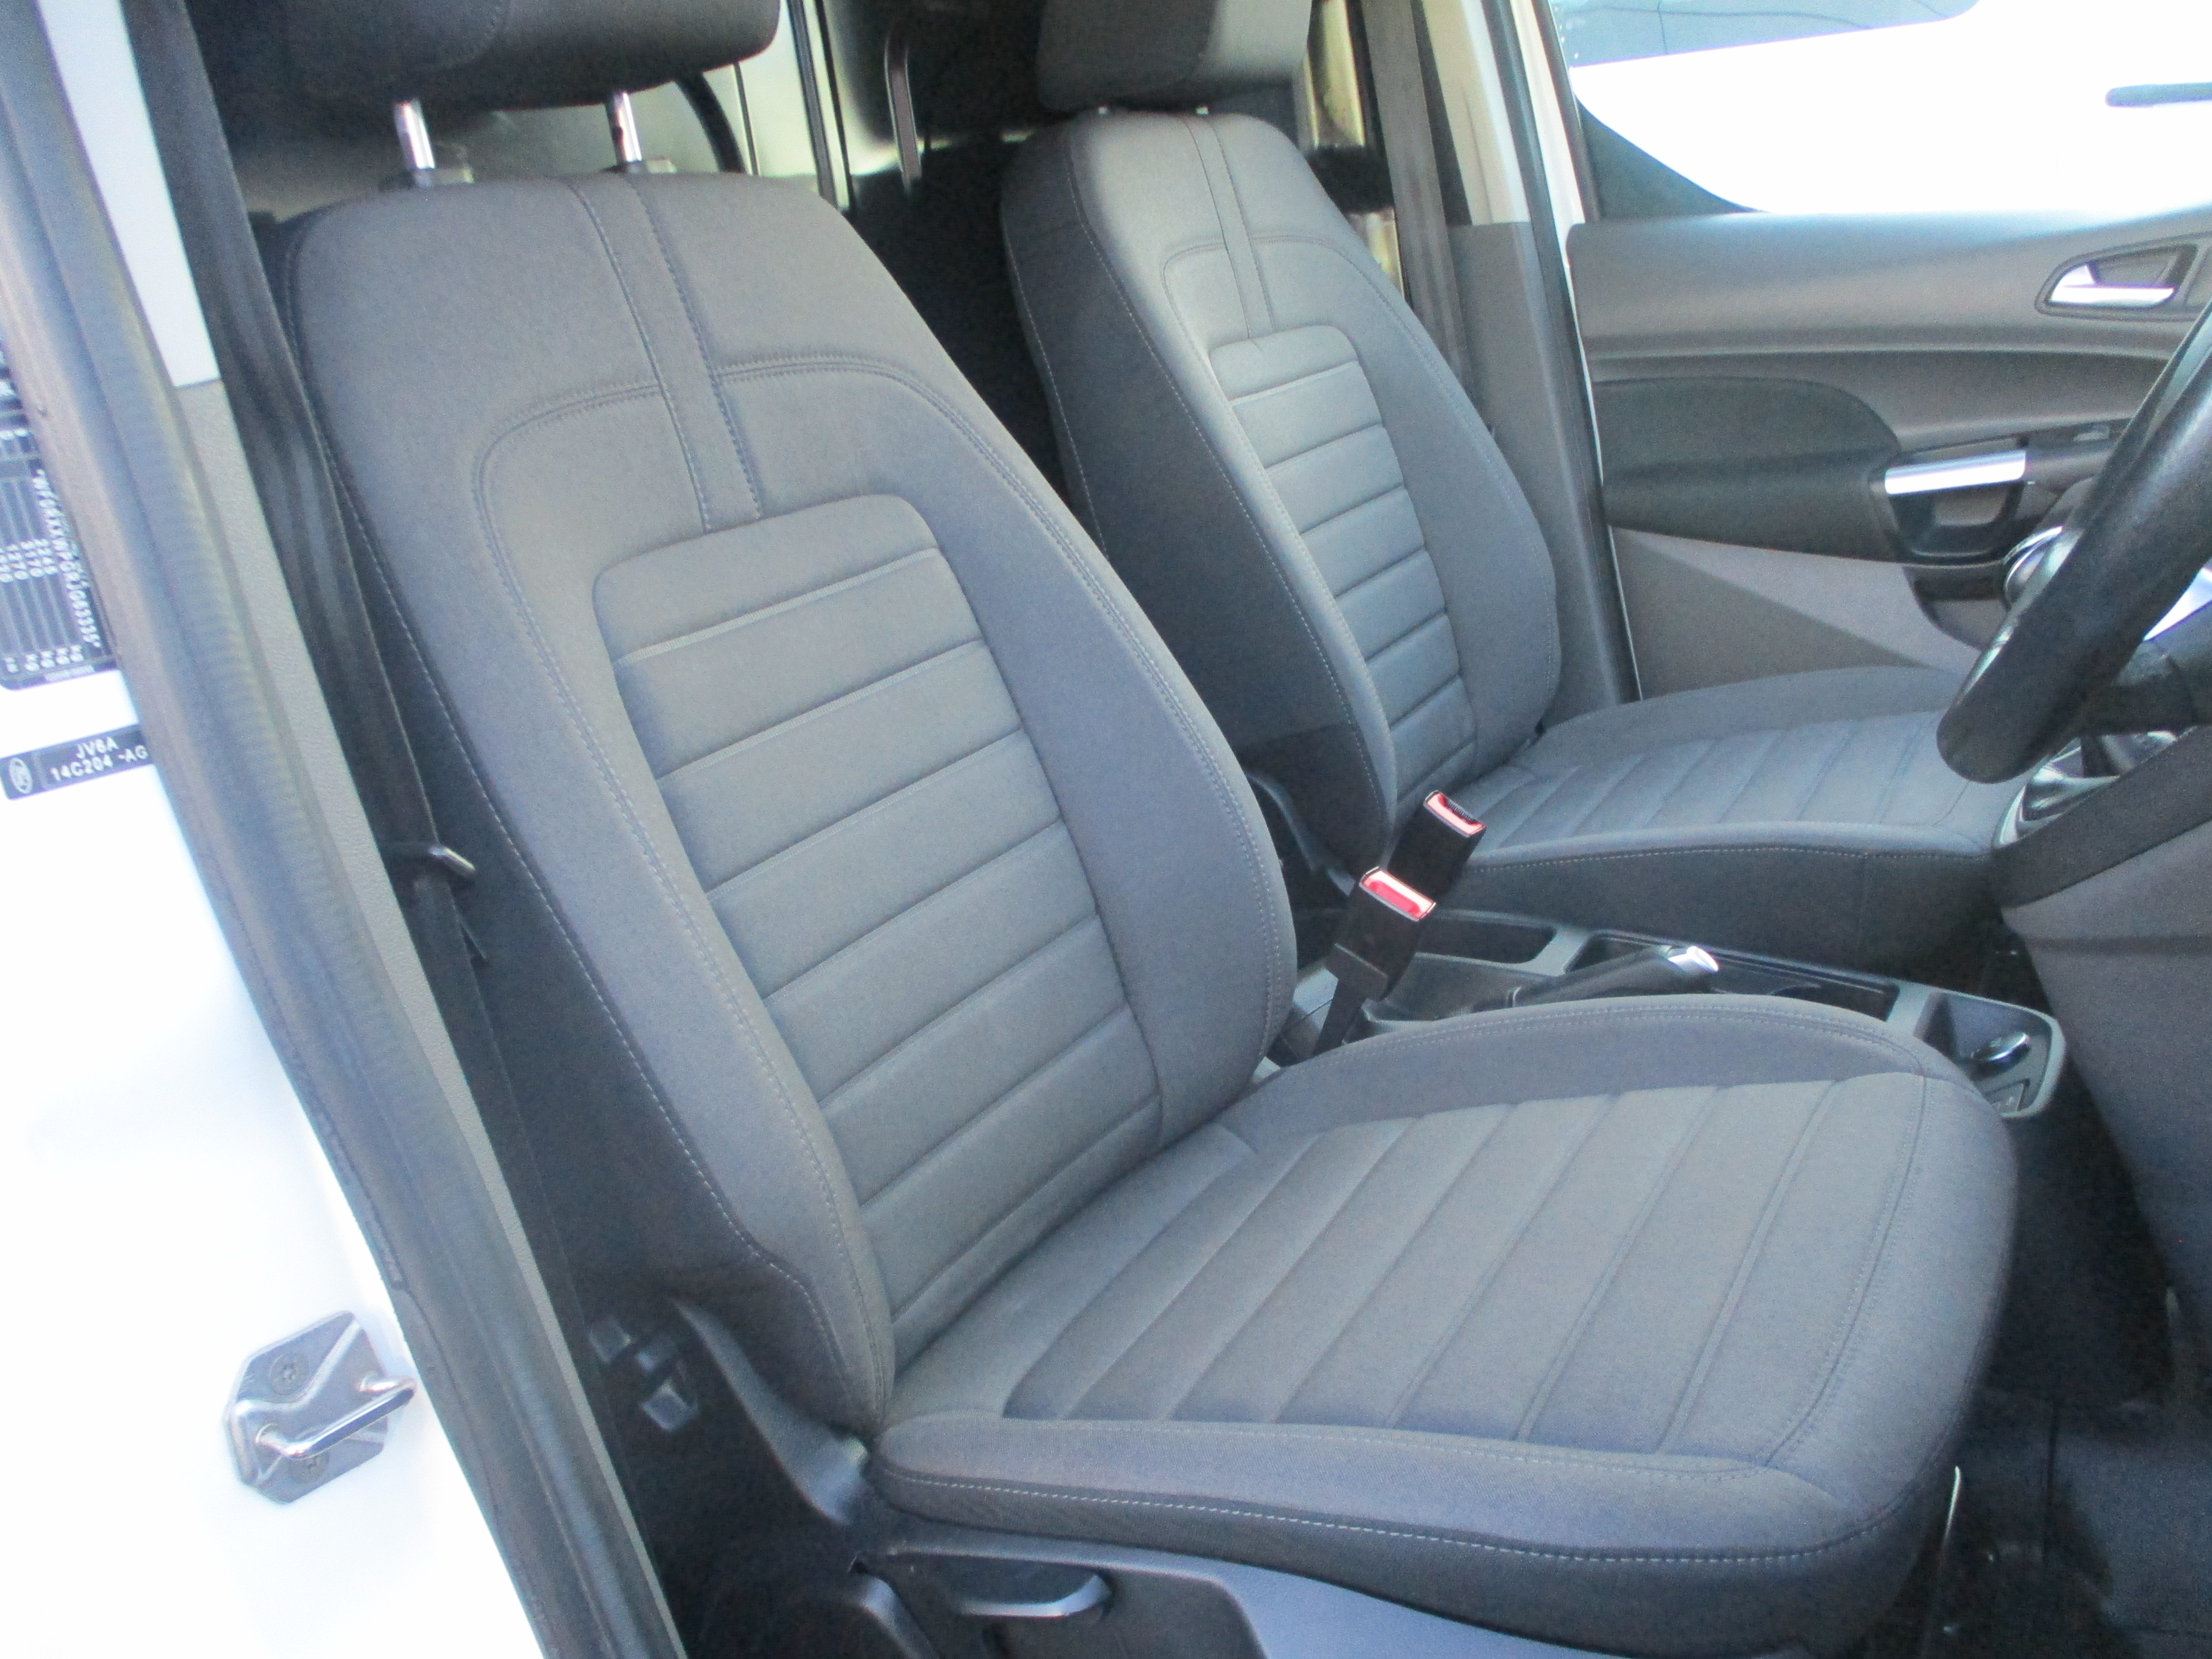 Ford Connect 200 L1 1.5 EcoBlue 120PS Limited Panel Van ( EURO 6 ) 2 FRONT SEATS